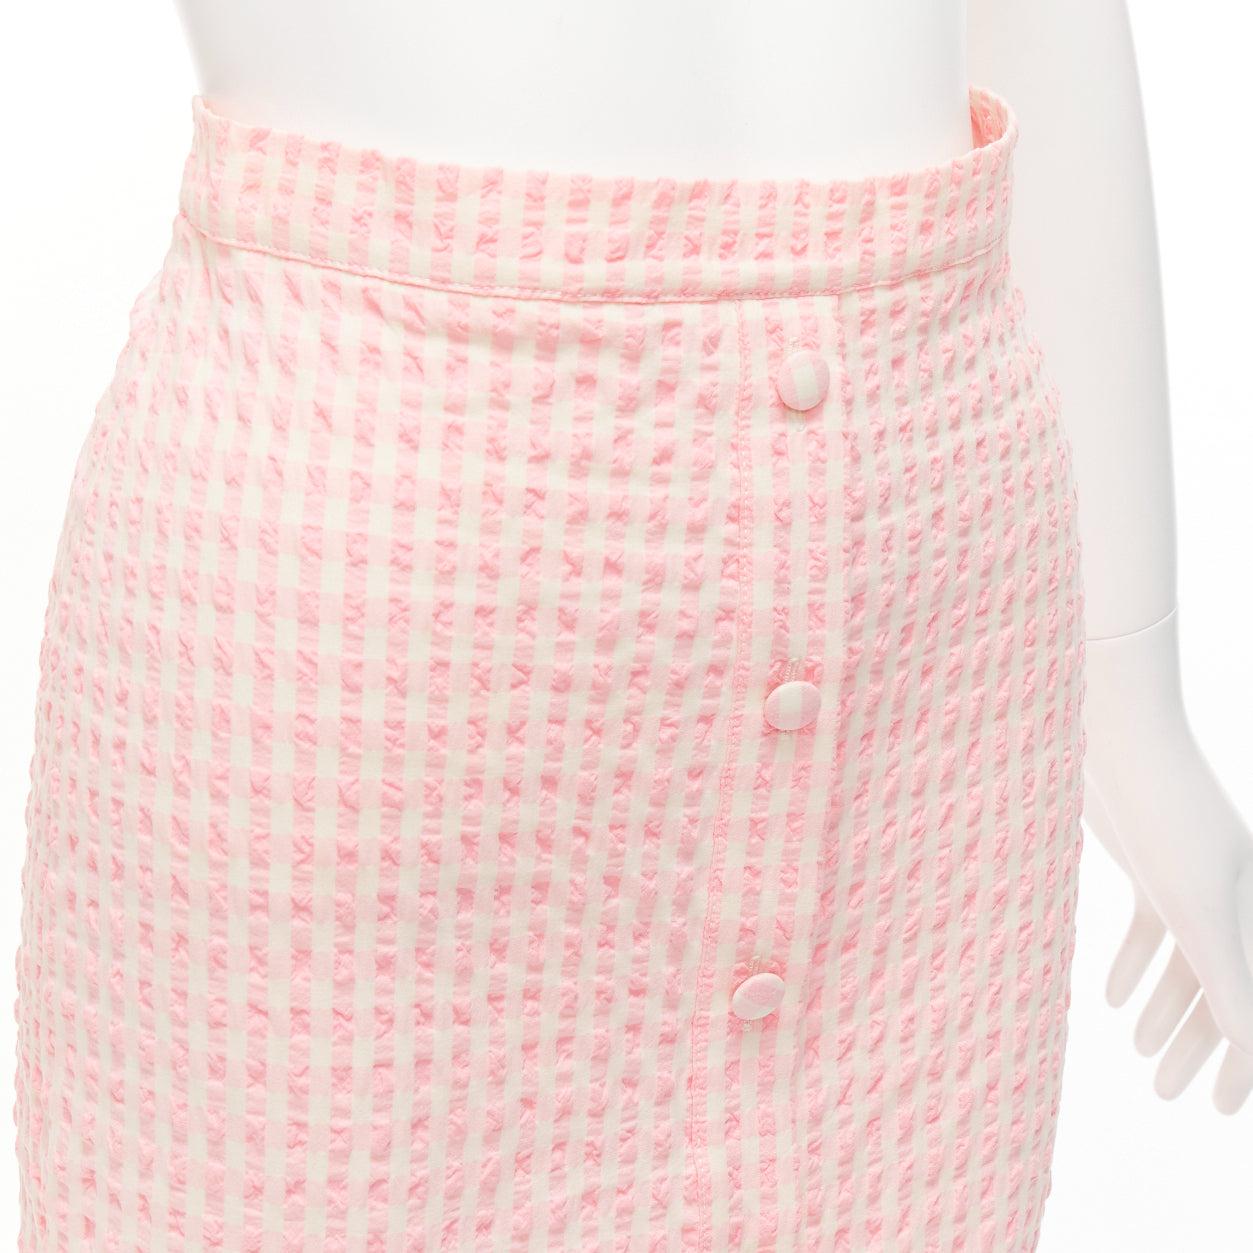 ALTUZARRA pink white gingham fabric button front midi pencil skirt FR36 S
Reference: LNKO/A02314
Brand: Altuzarra
Material: Cotton, Blend
Color: Pink, White
Pattern: Gingham
Closure: Zip
Extra Details: Side zip.
Made in: Italy

CONDITION:
Condition: